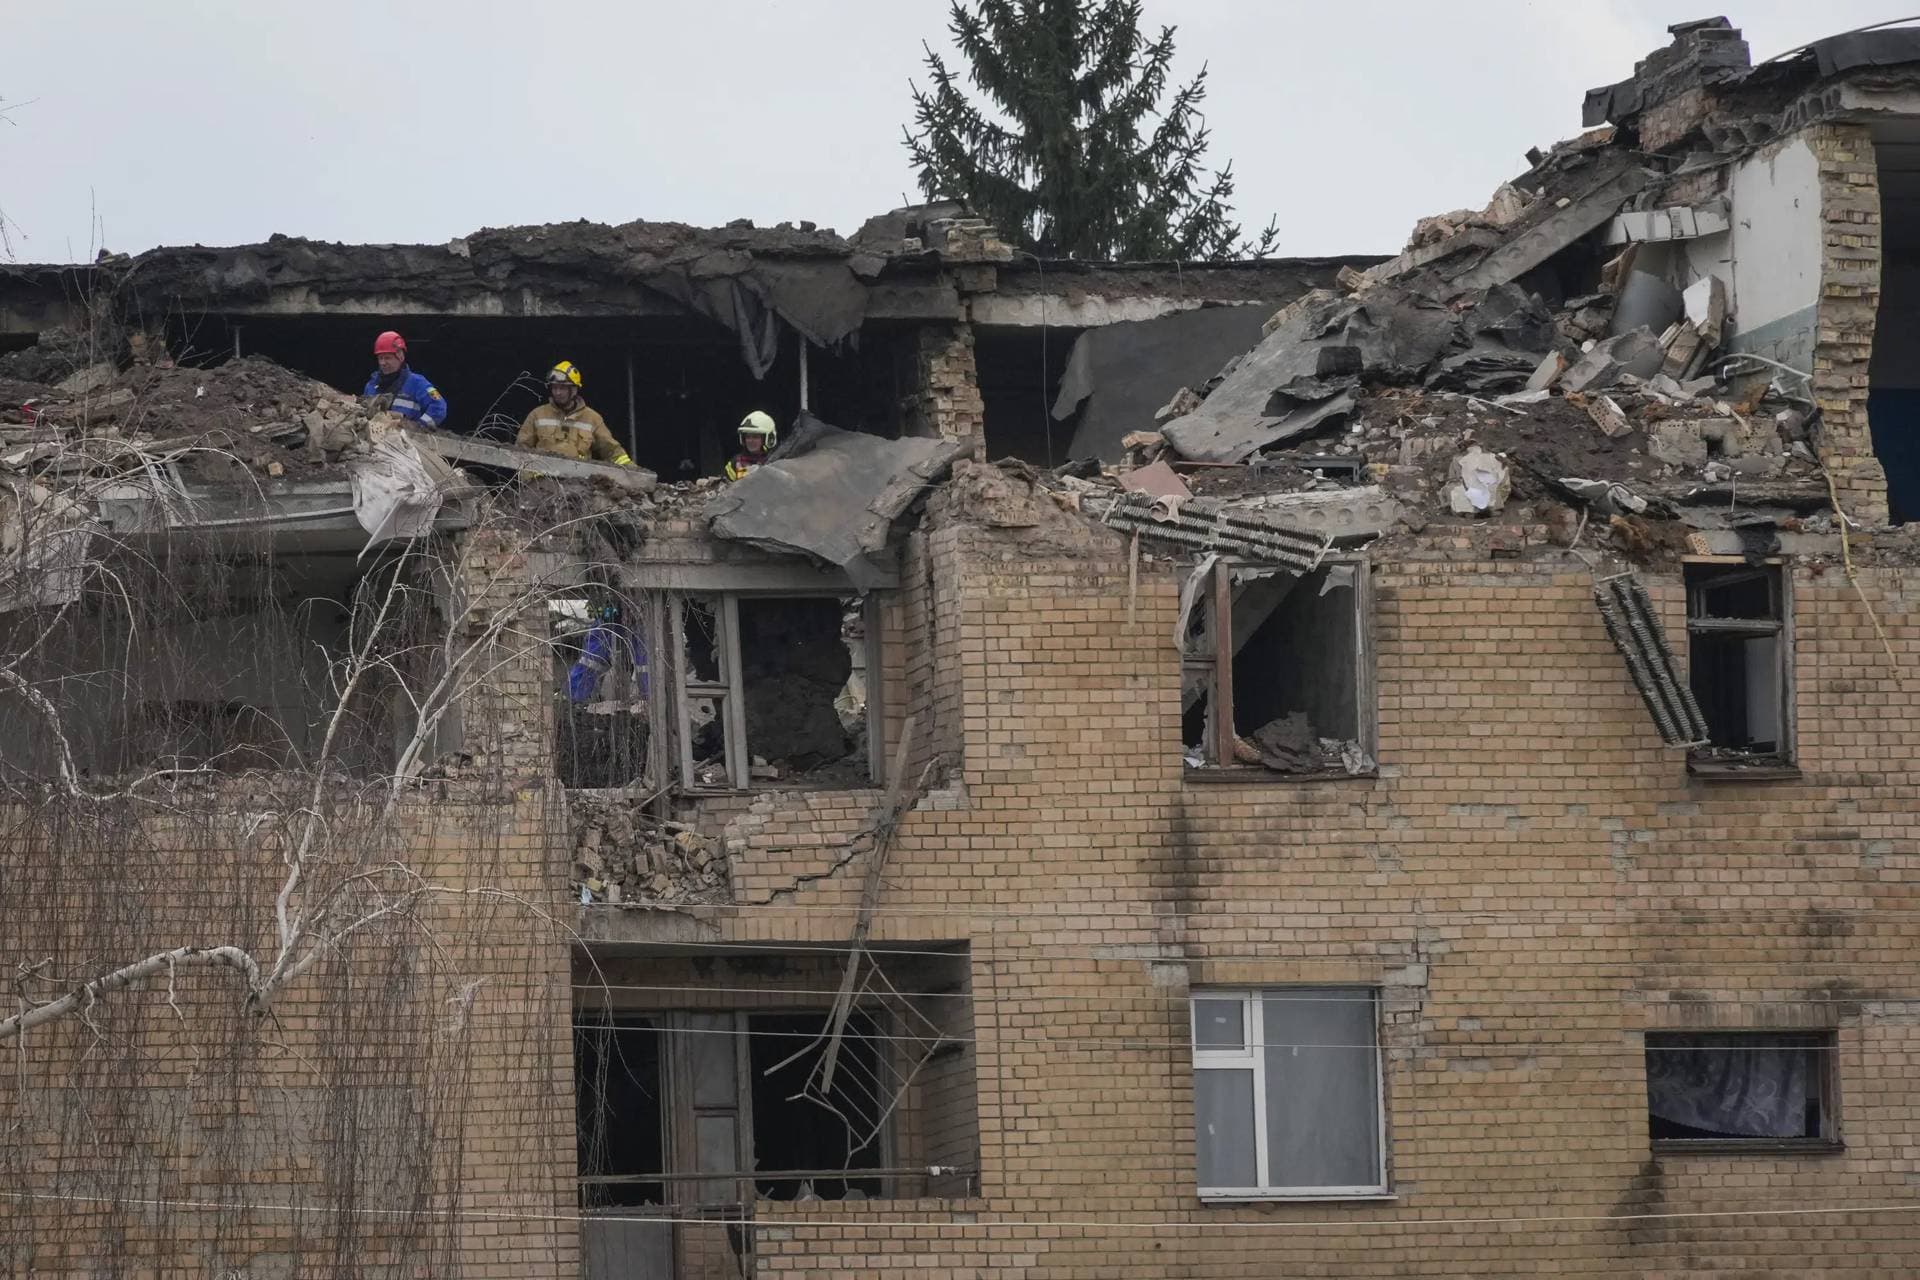 Emergency personnel work at the scene following a drone attack in the town of Rzhyshchiv